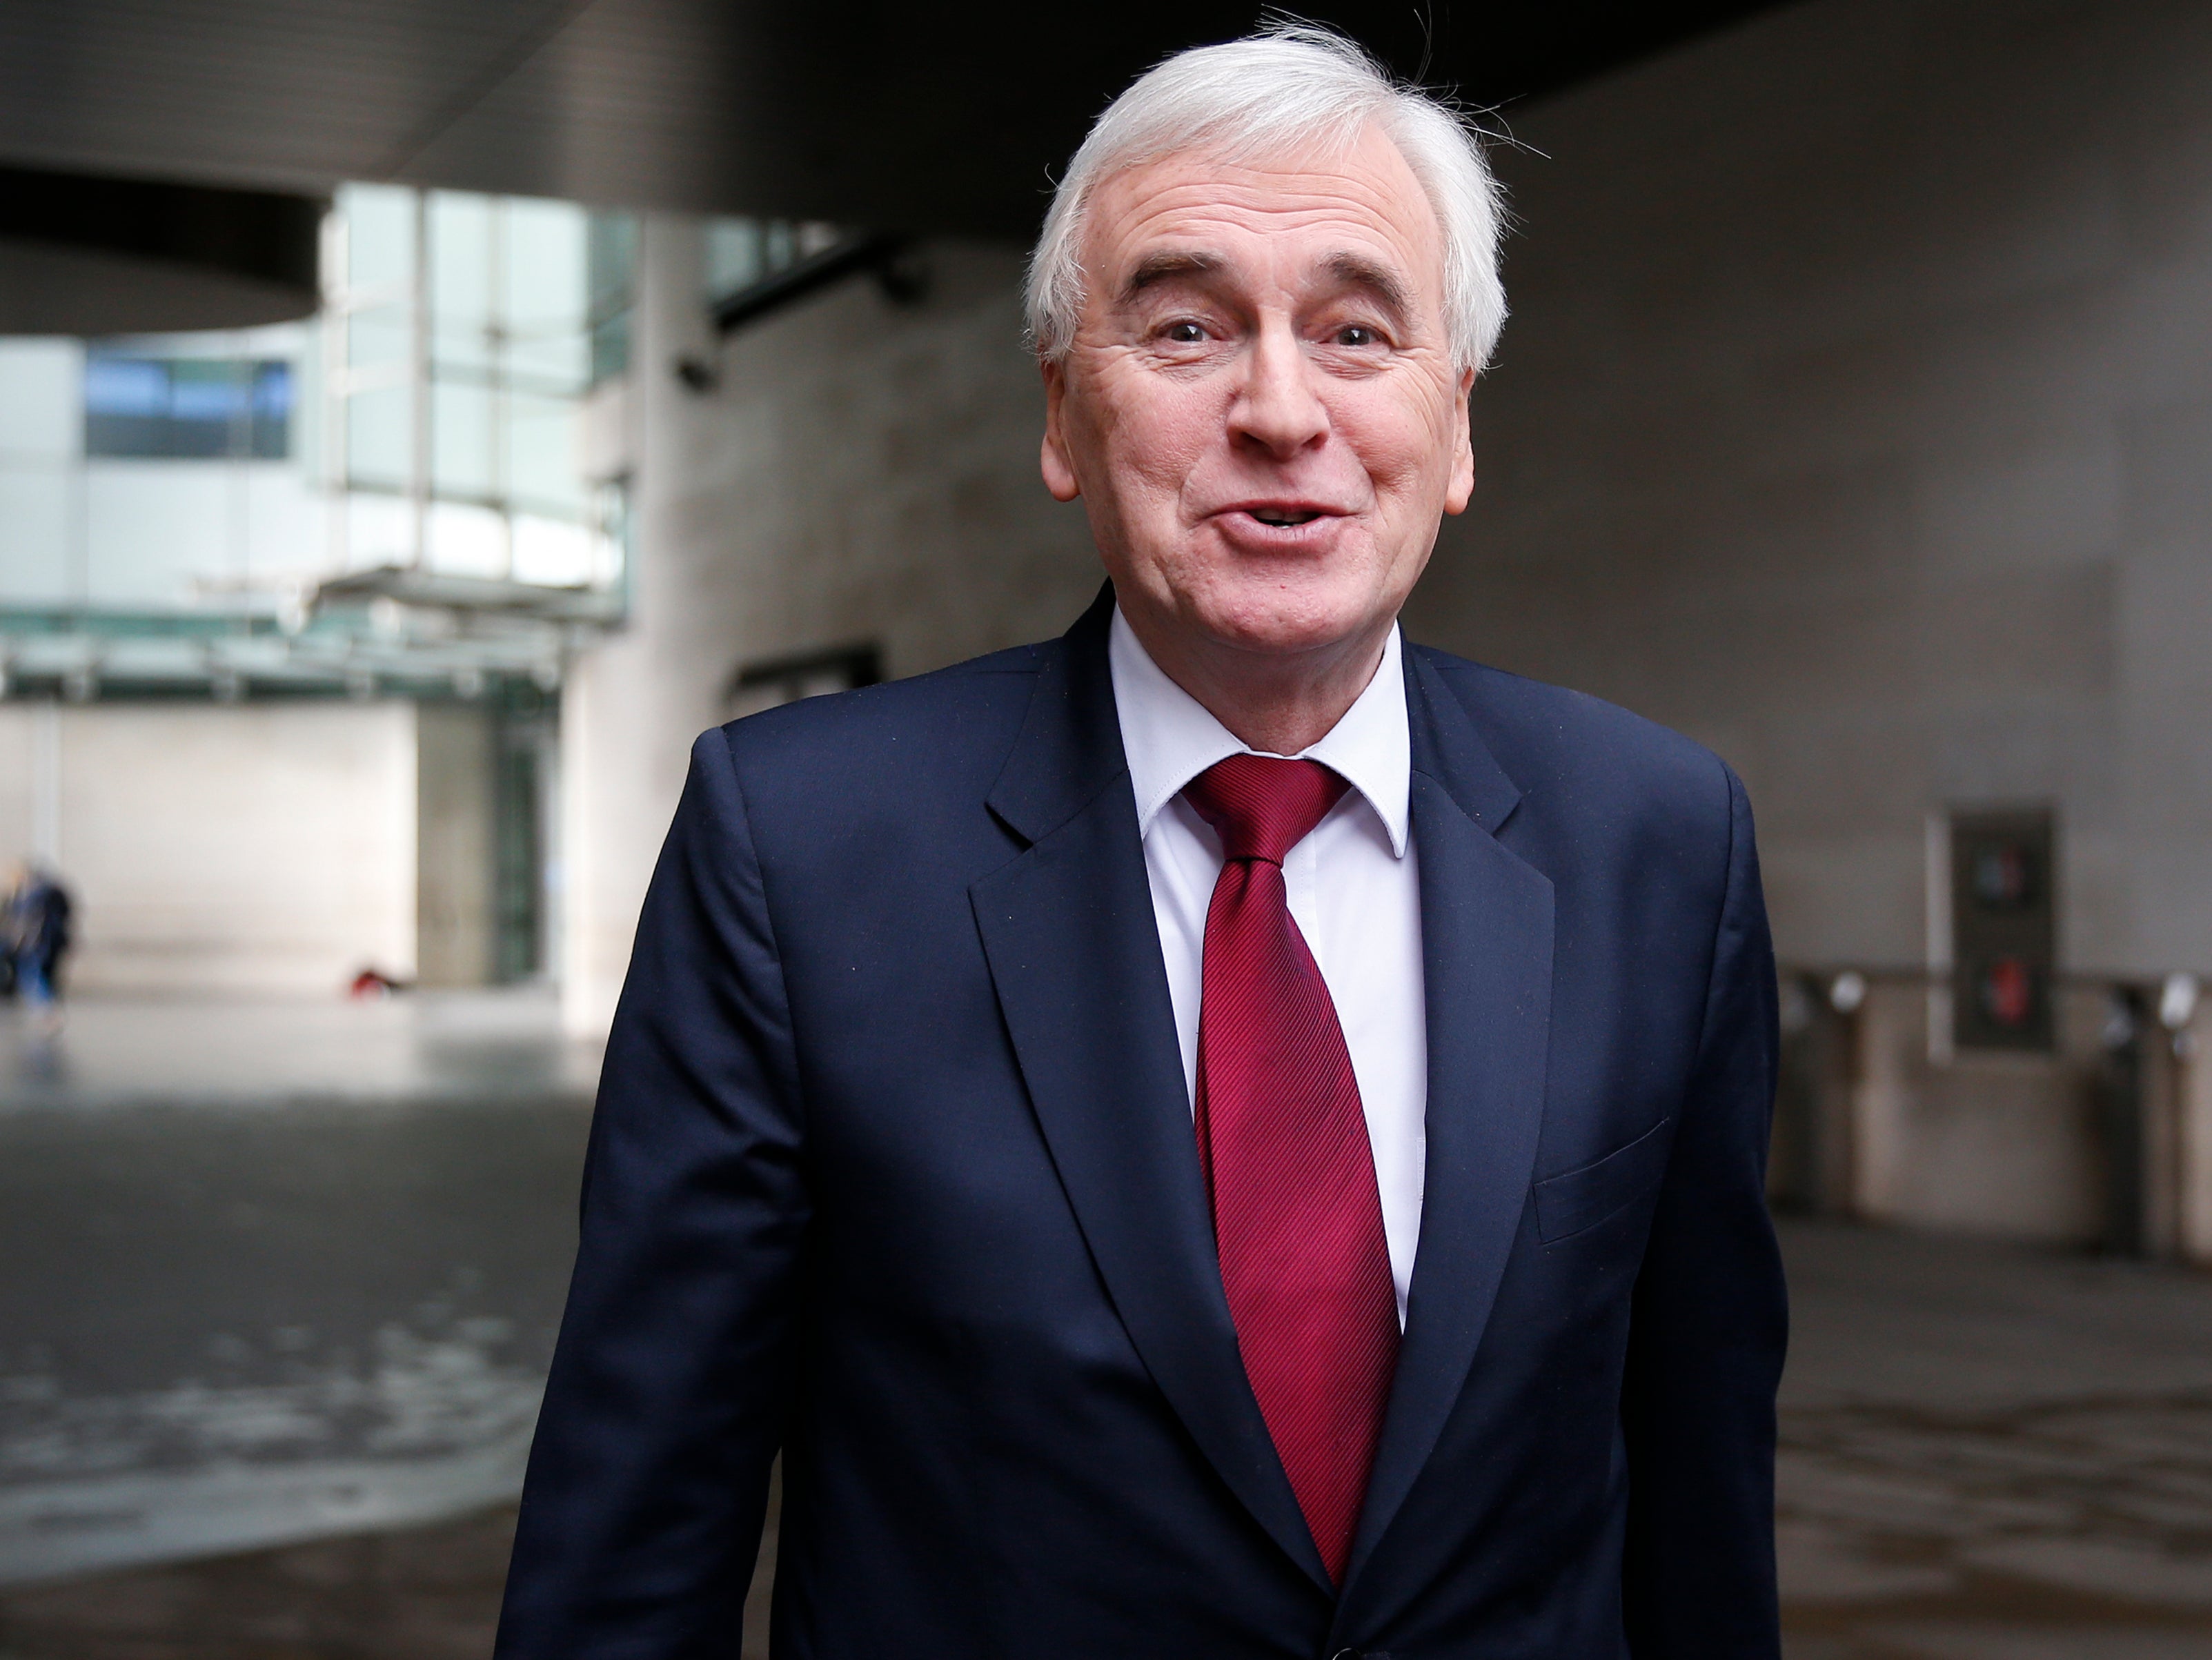 Former shadow chancellor of the exchequer John McDonnell among those campaigning for change